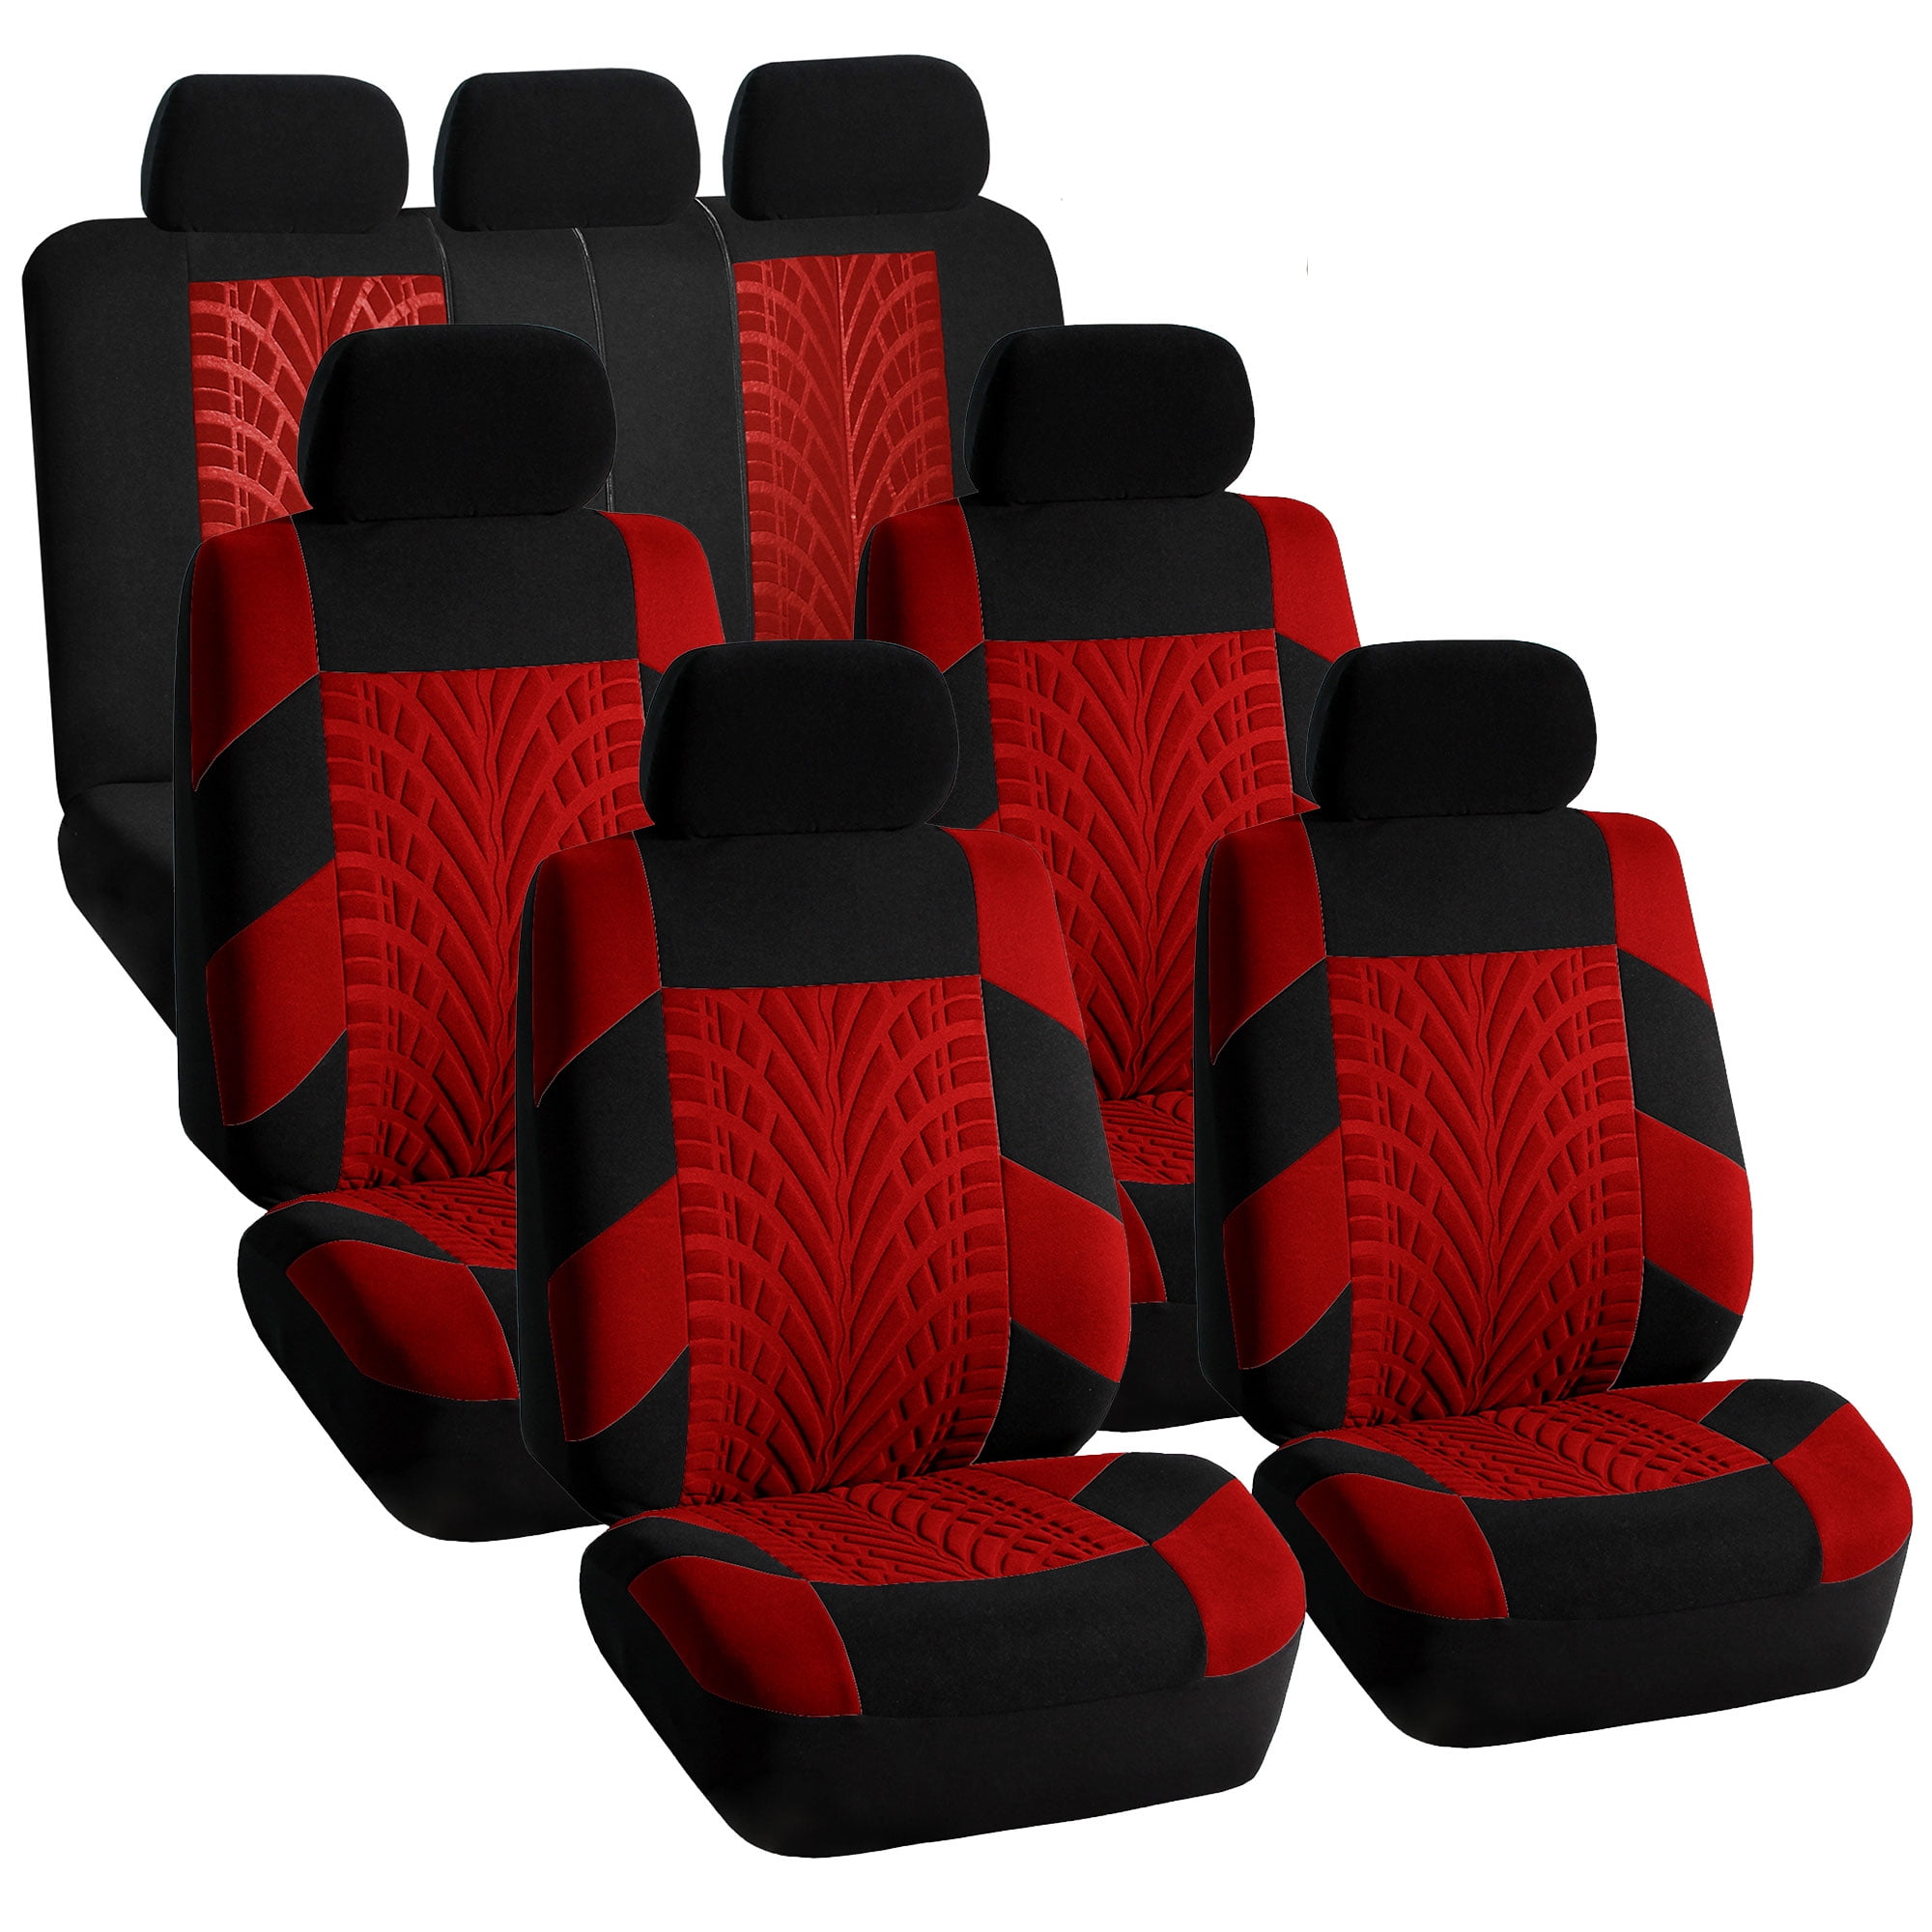 Car Seat Covers 3 Row for Auto SUV VAN 7 seaters Red